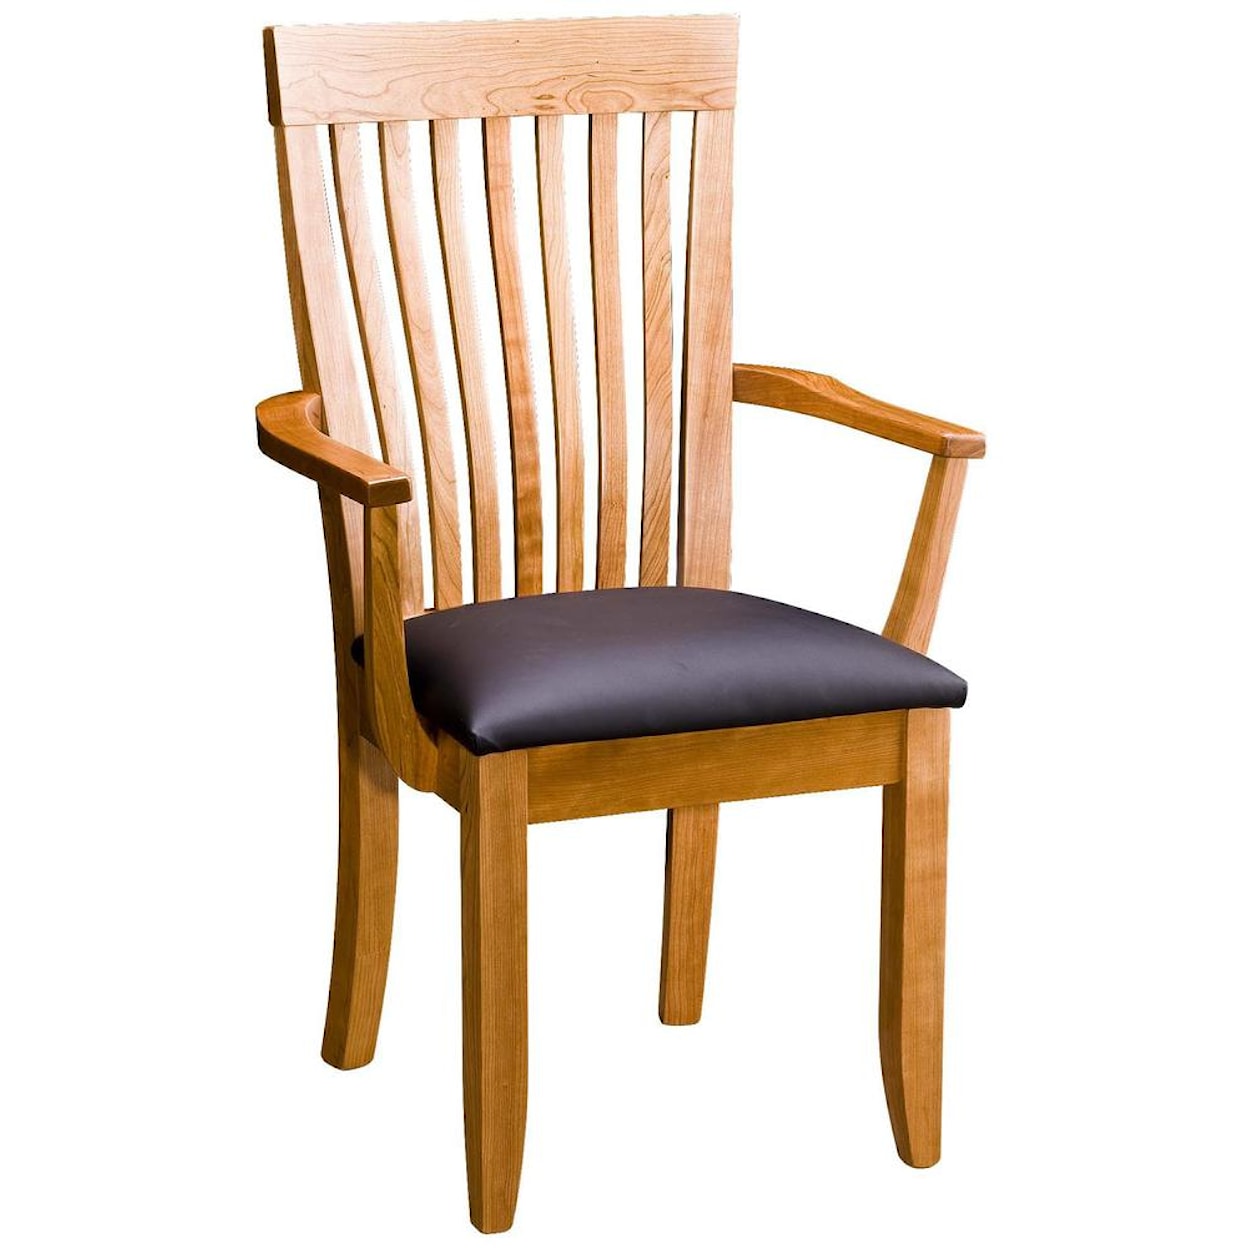 Gat Creek Dining Monterey Arm Chair with Leather Seat